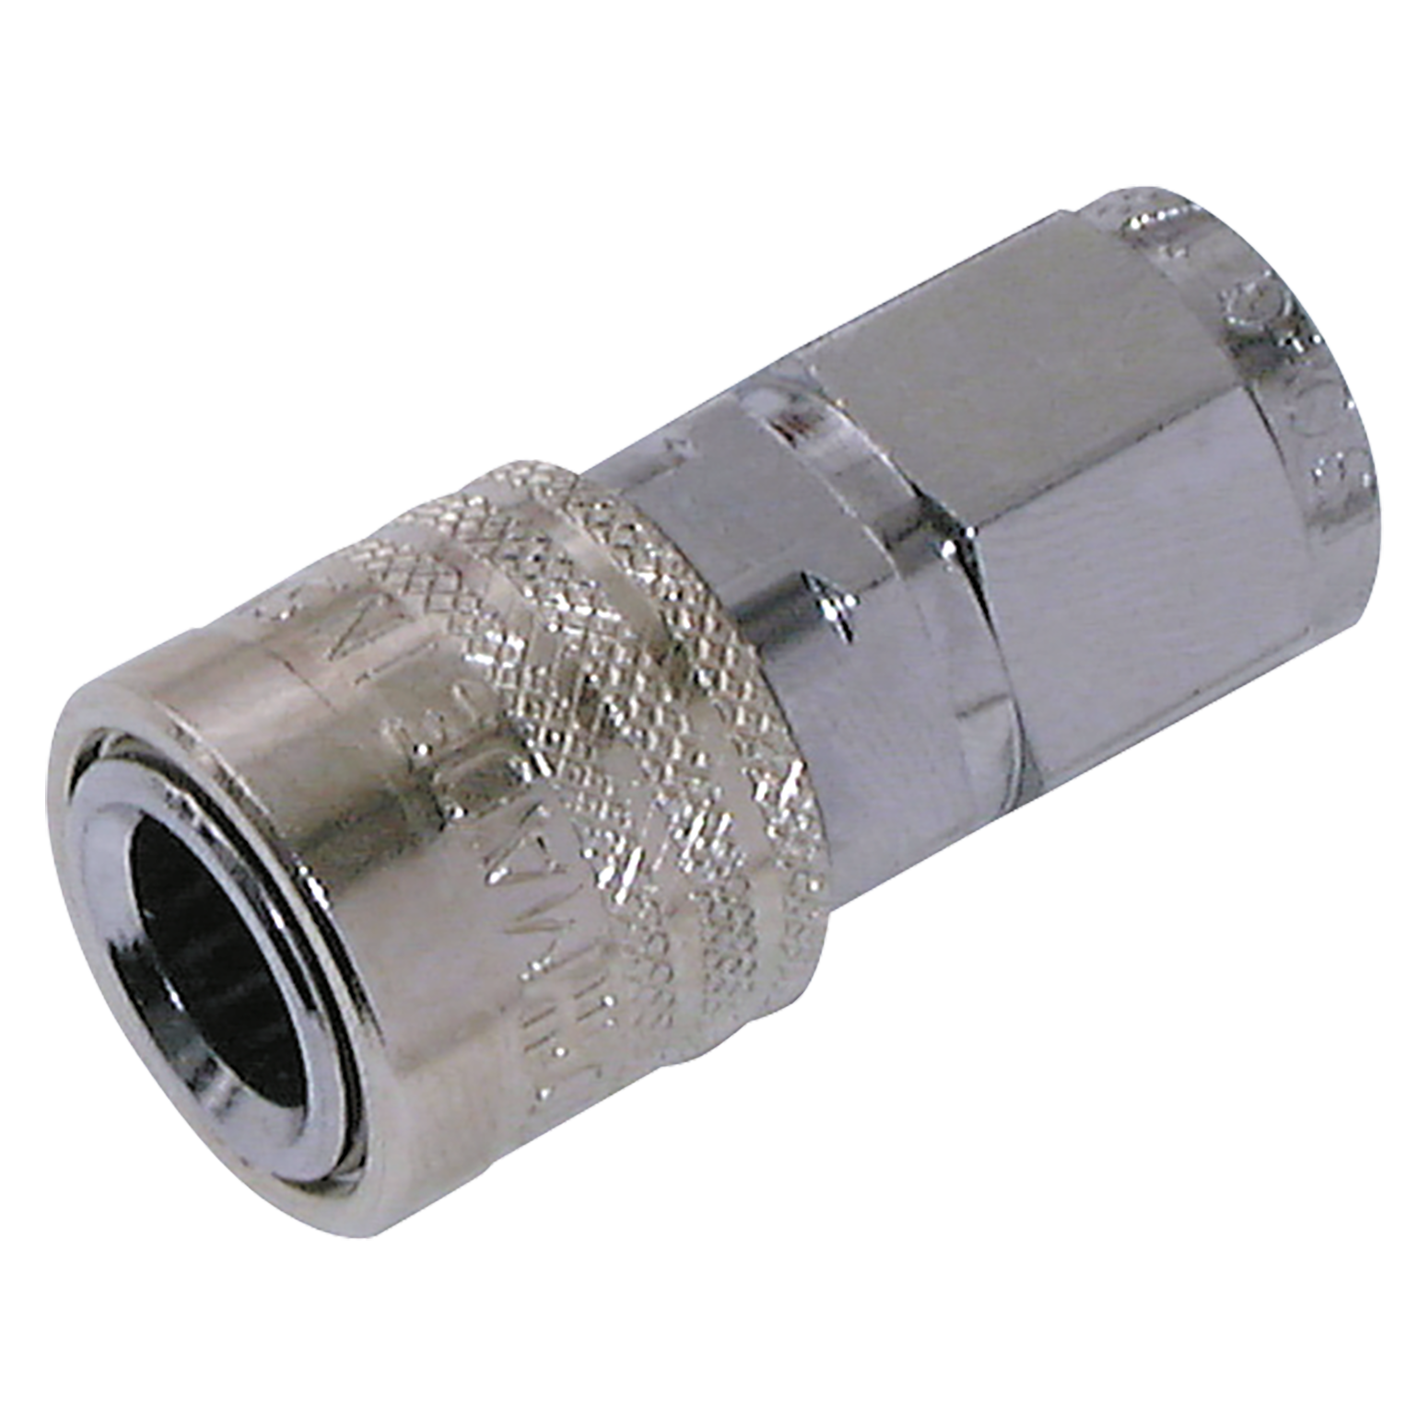 1/8" BSP Female Hydraulic Quick Release Coupling